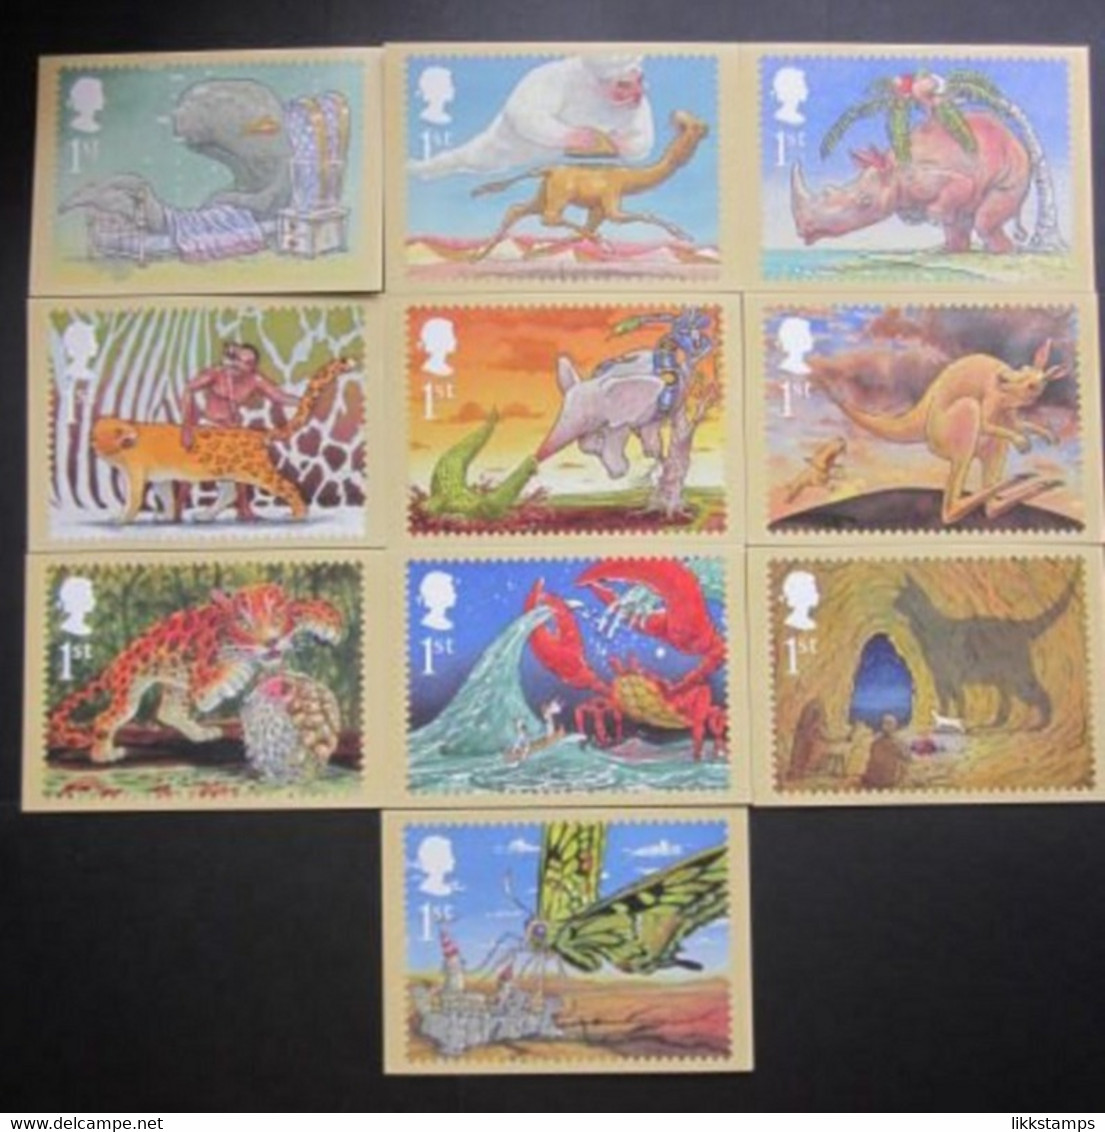 2002 RUDYARD KIPLING'S JUST SO STORIES P.H.Q. CARDS UNUSED, ISSUE No. 237 (B) #00898 - PHQ Cards